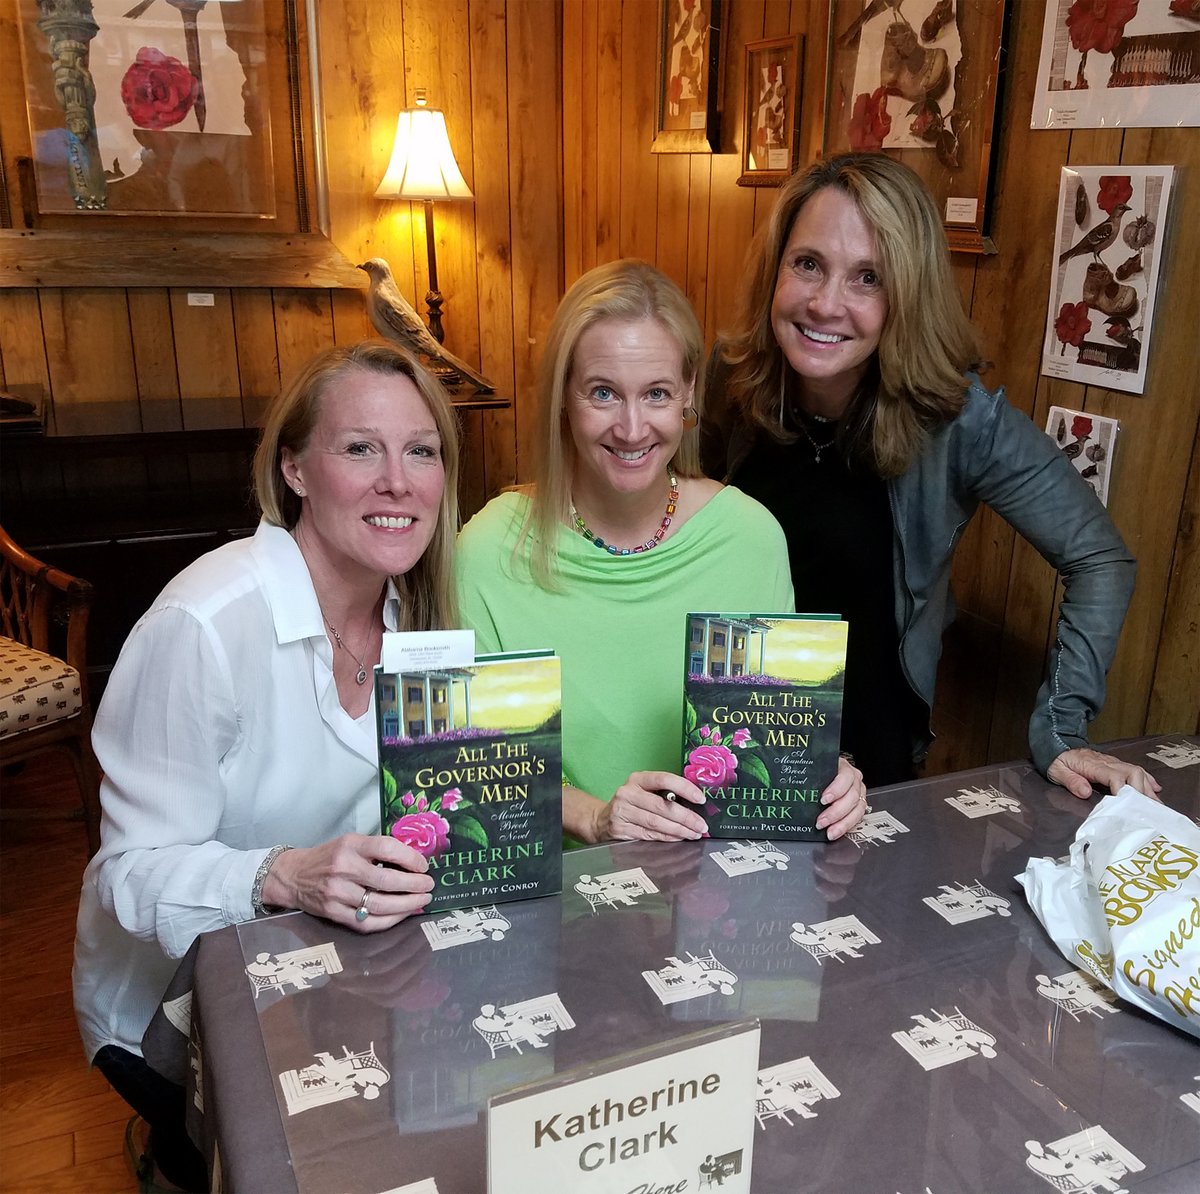 #ThrowbackThursday to 4/2/16, when Katherine Clark was here to sign ALL THE GOVERNOR'S MEN, while @pcalhenry and @lanierisom stopped by! #TBT #TBThursday And yes, we still have a few signed first editions: alabamabooksmith.com/signed-copies/…